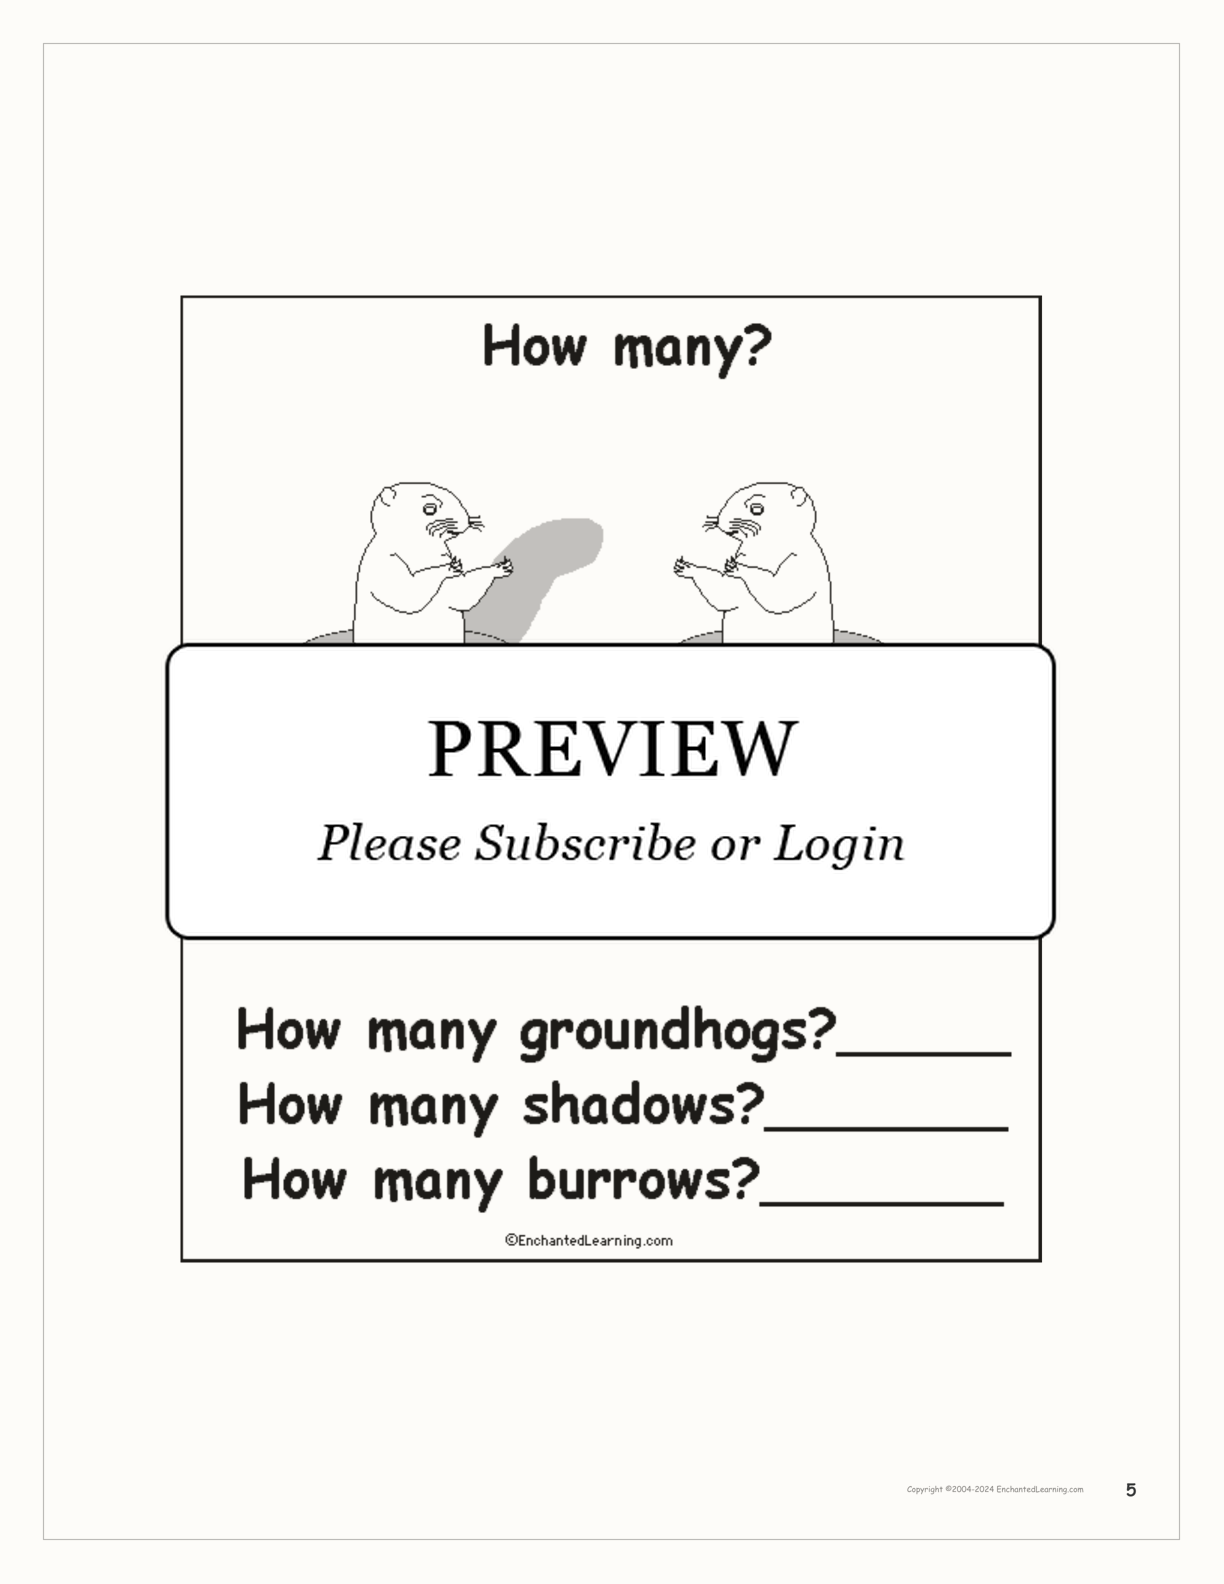 'Groundhog Day: How Many?' interactive worksheet page 5